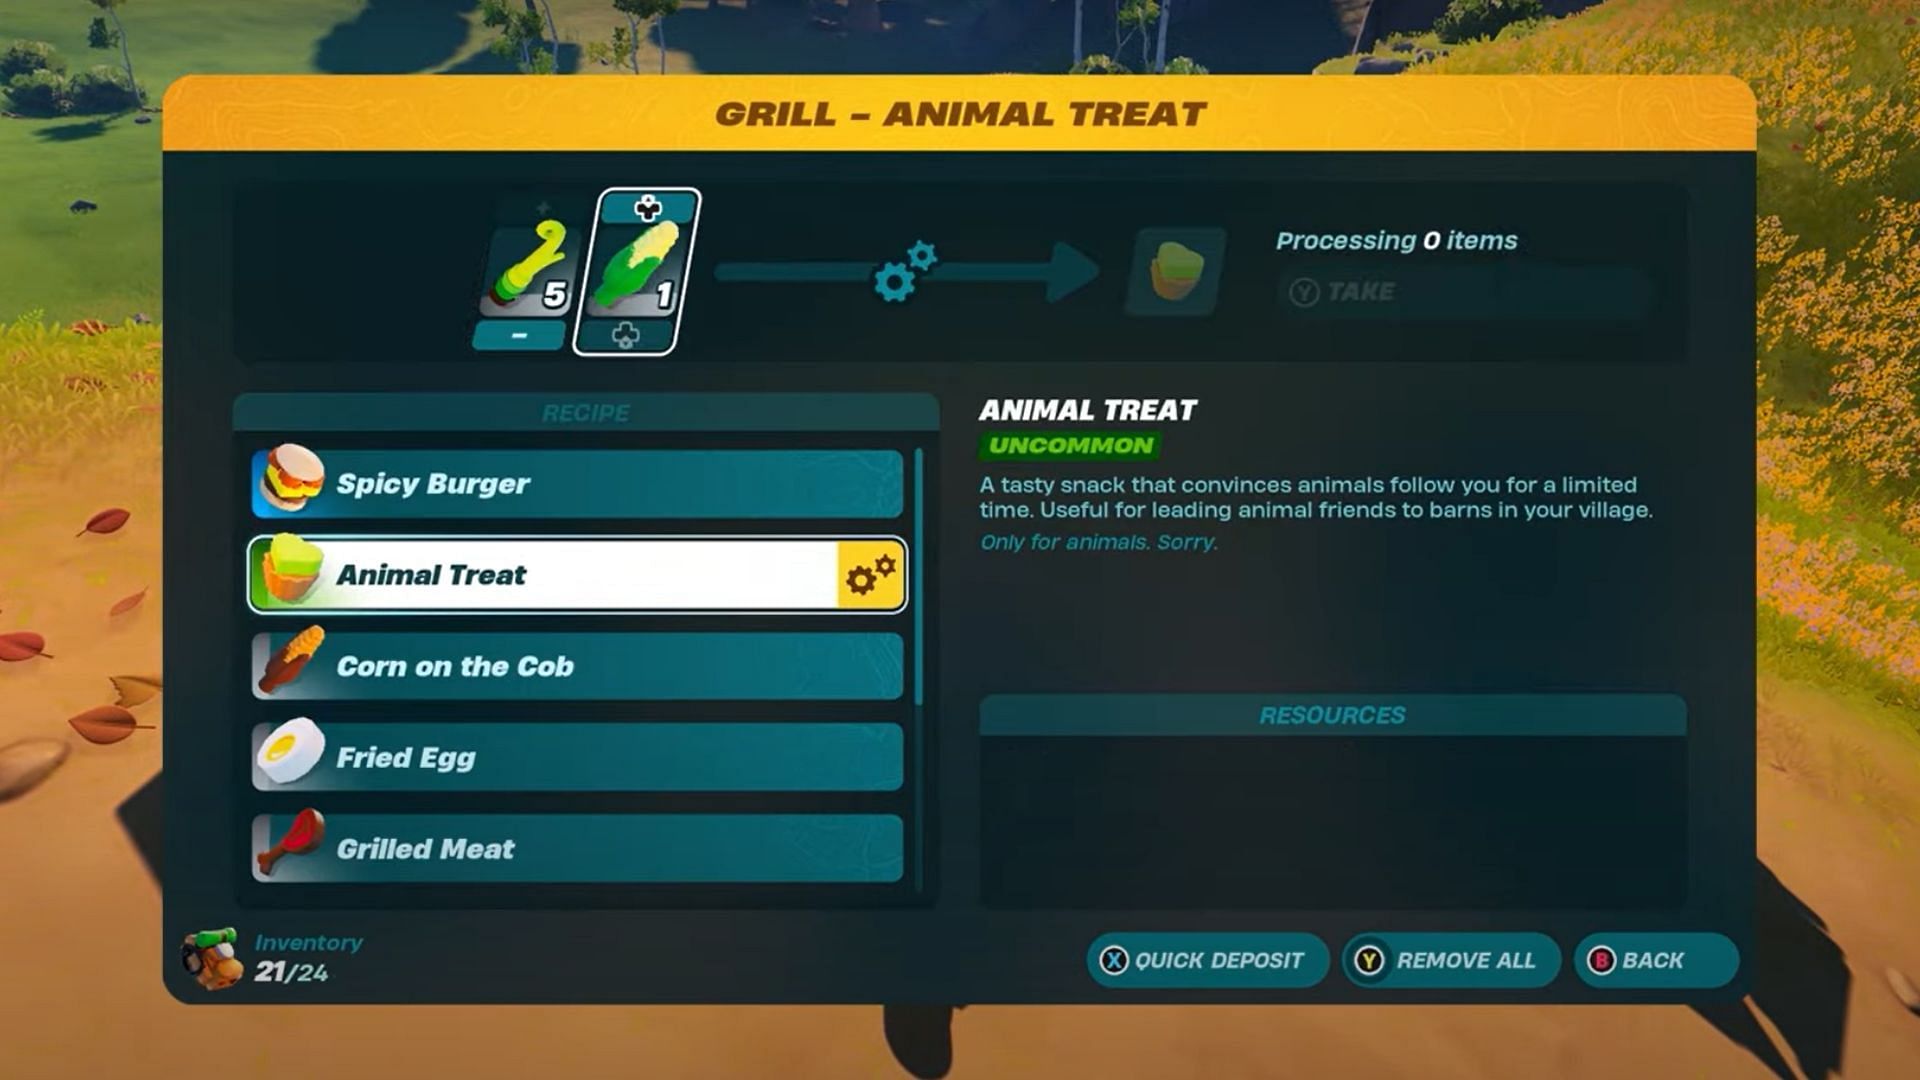 Making an Animal Treat on the Grill (Image via Perfect Score on YouTube and Epic Games)